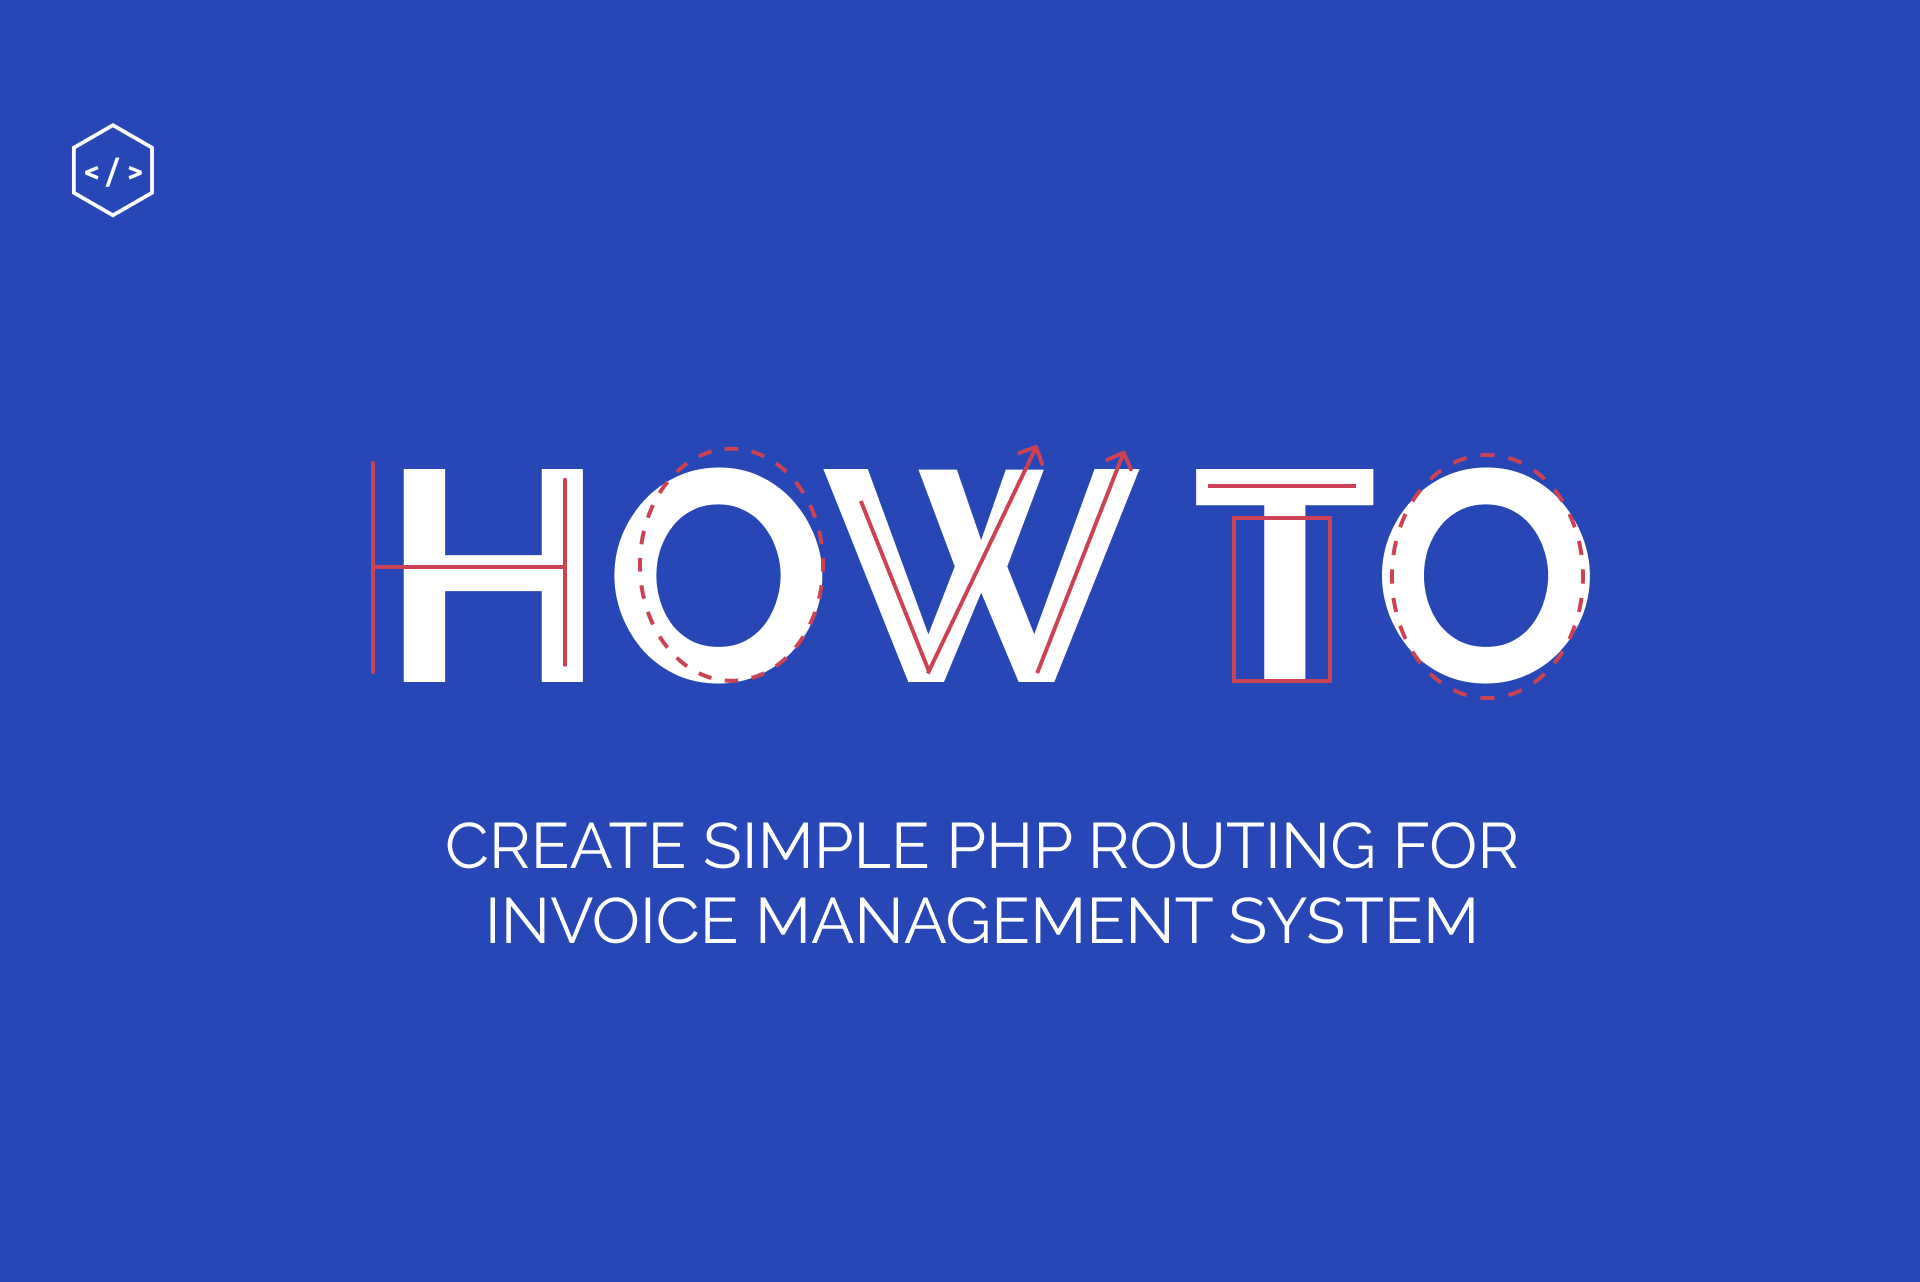 Simple PHP Routing for Invoice Management System